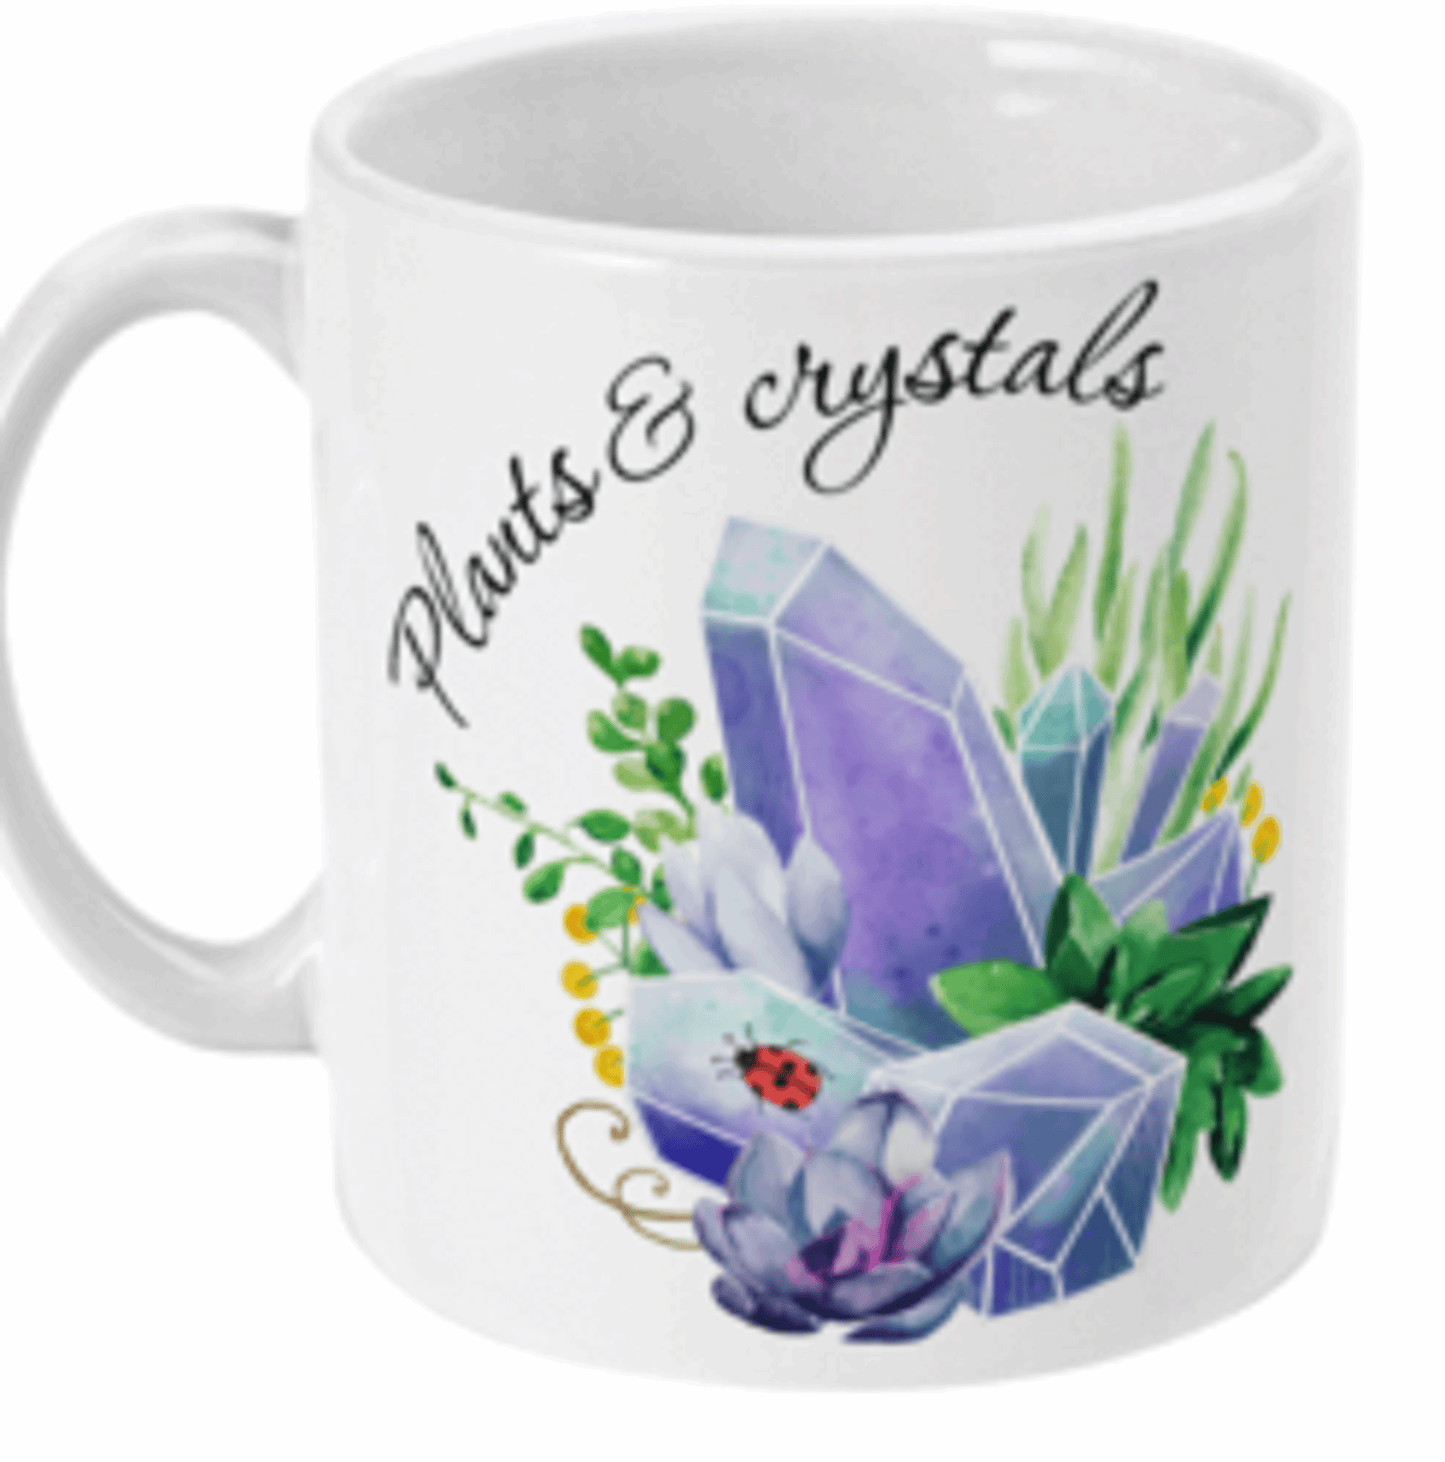  Plants and Crystals Beautiful Watercolour Coffee Mug by Free Spirit Accessories sold by Free Spirit Accessories